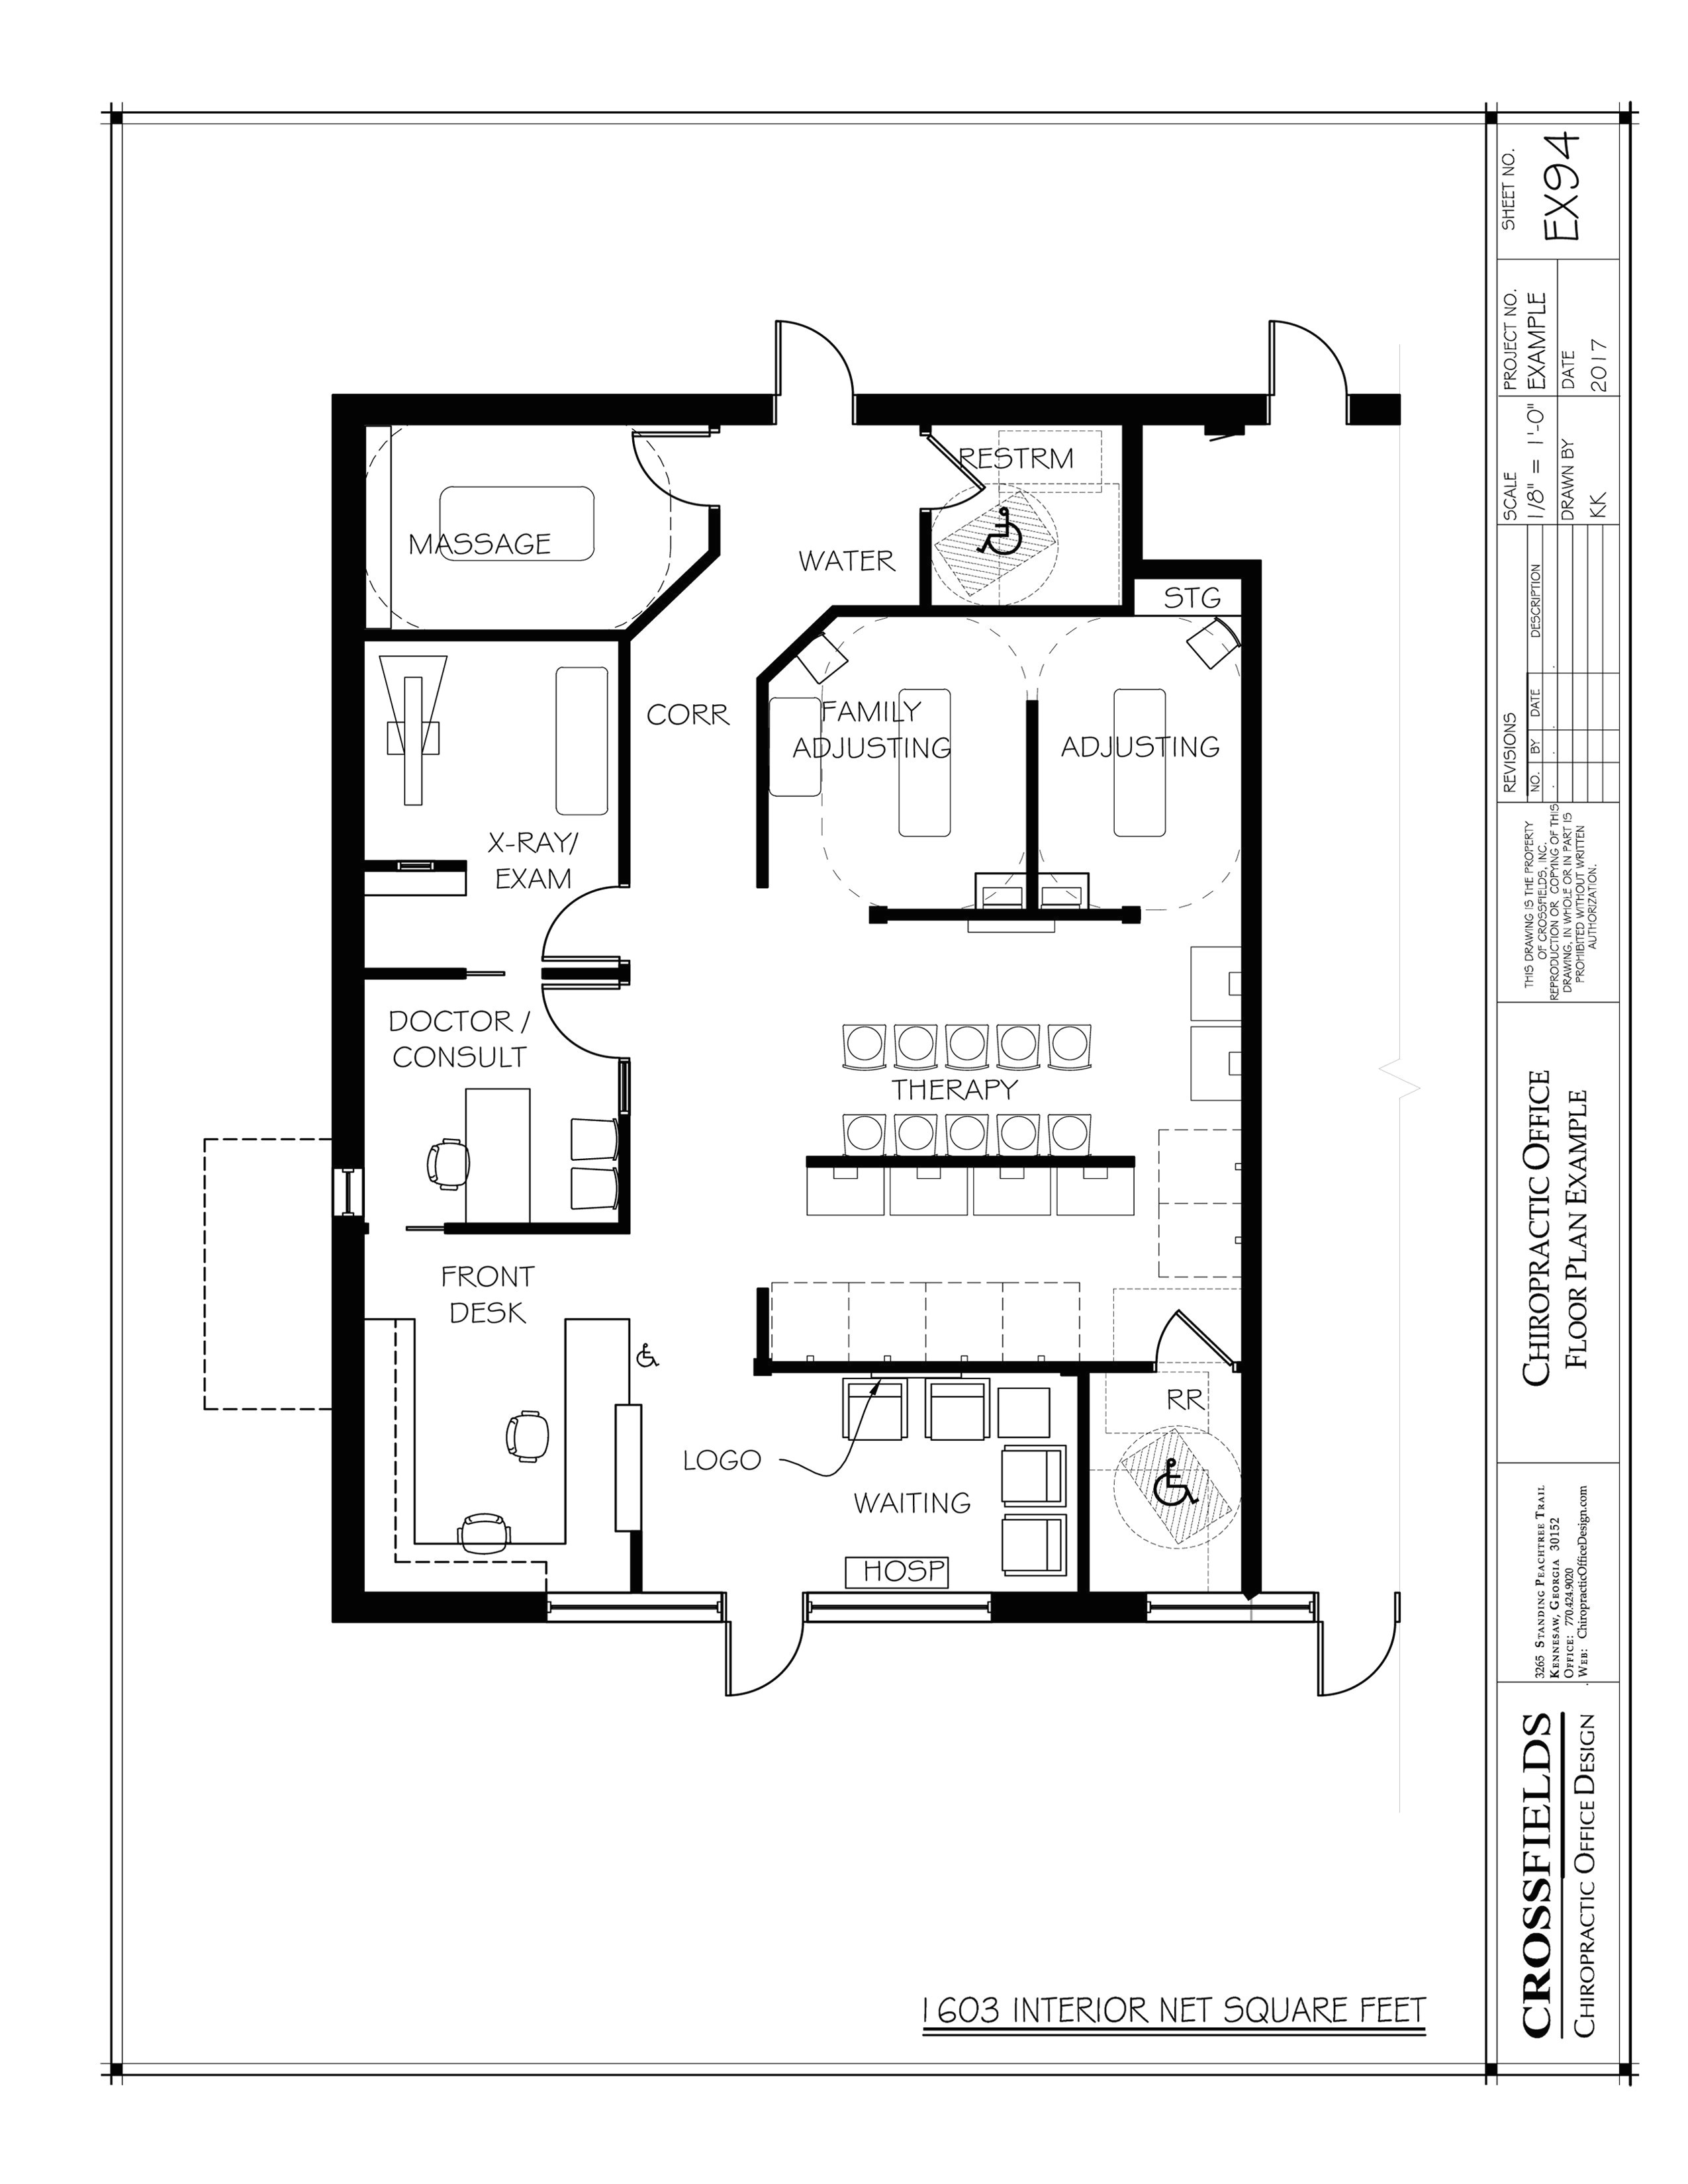 Drawing T Square 24 Fresh How to Draw A Floor Plan In Sketchup Inspiration Floor